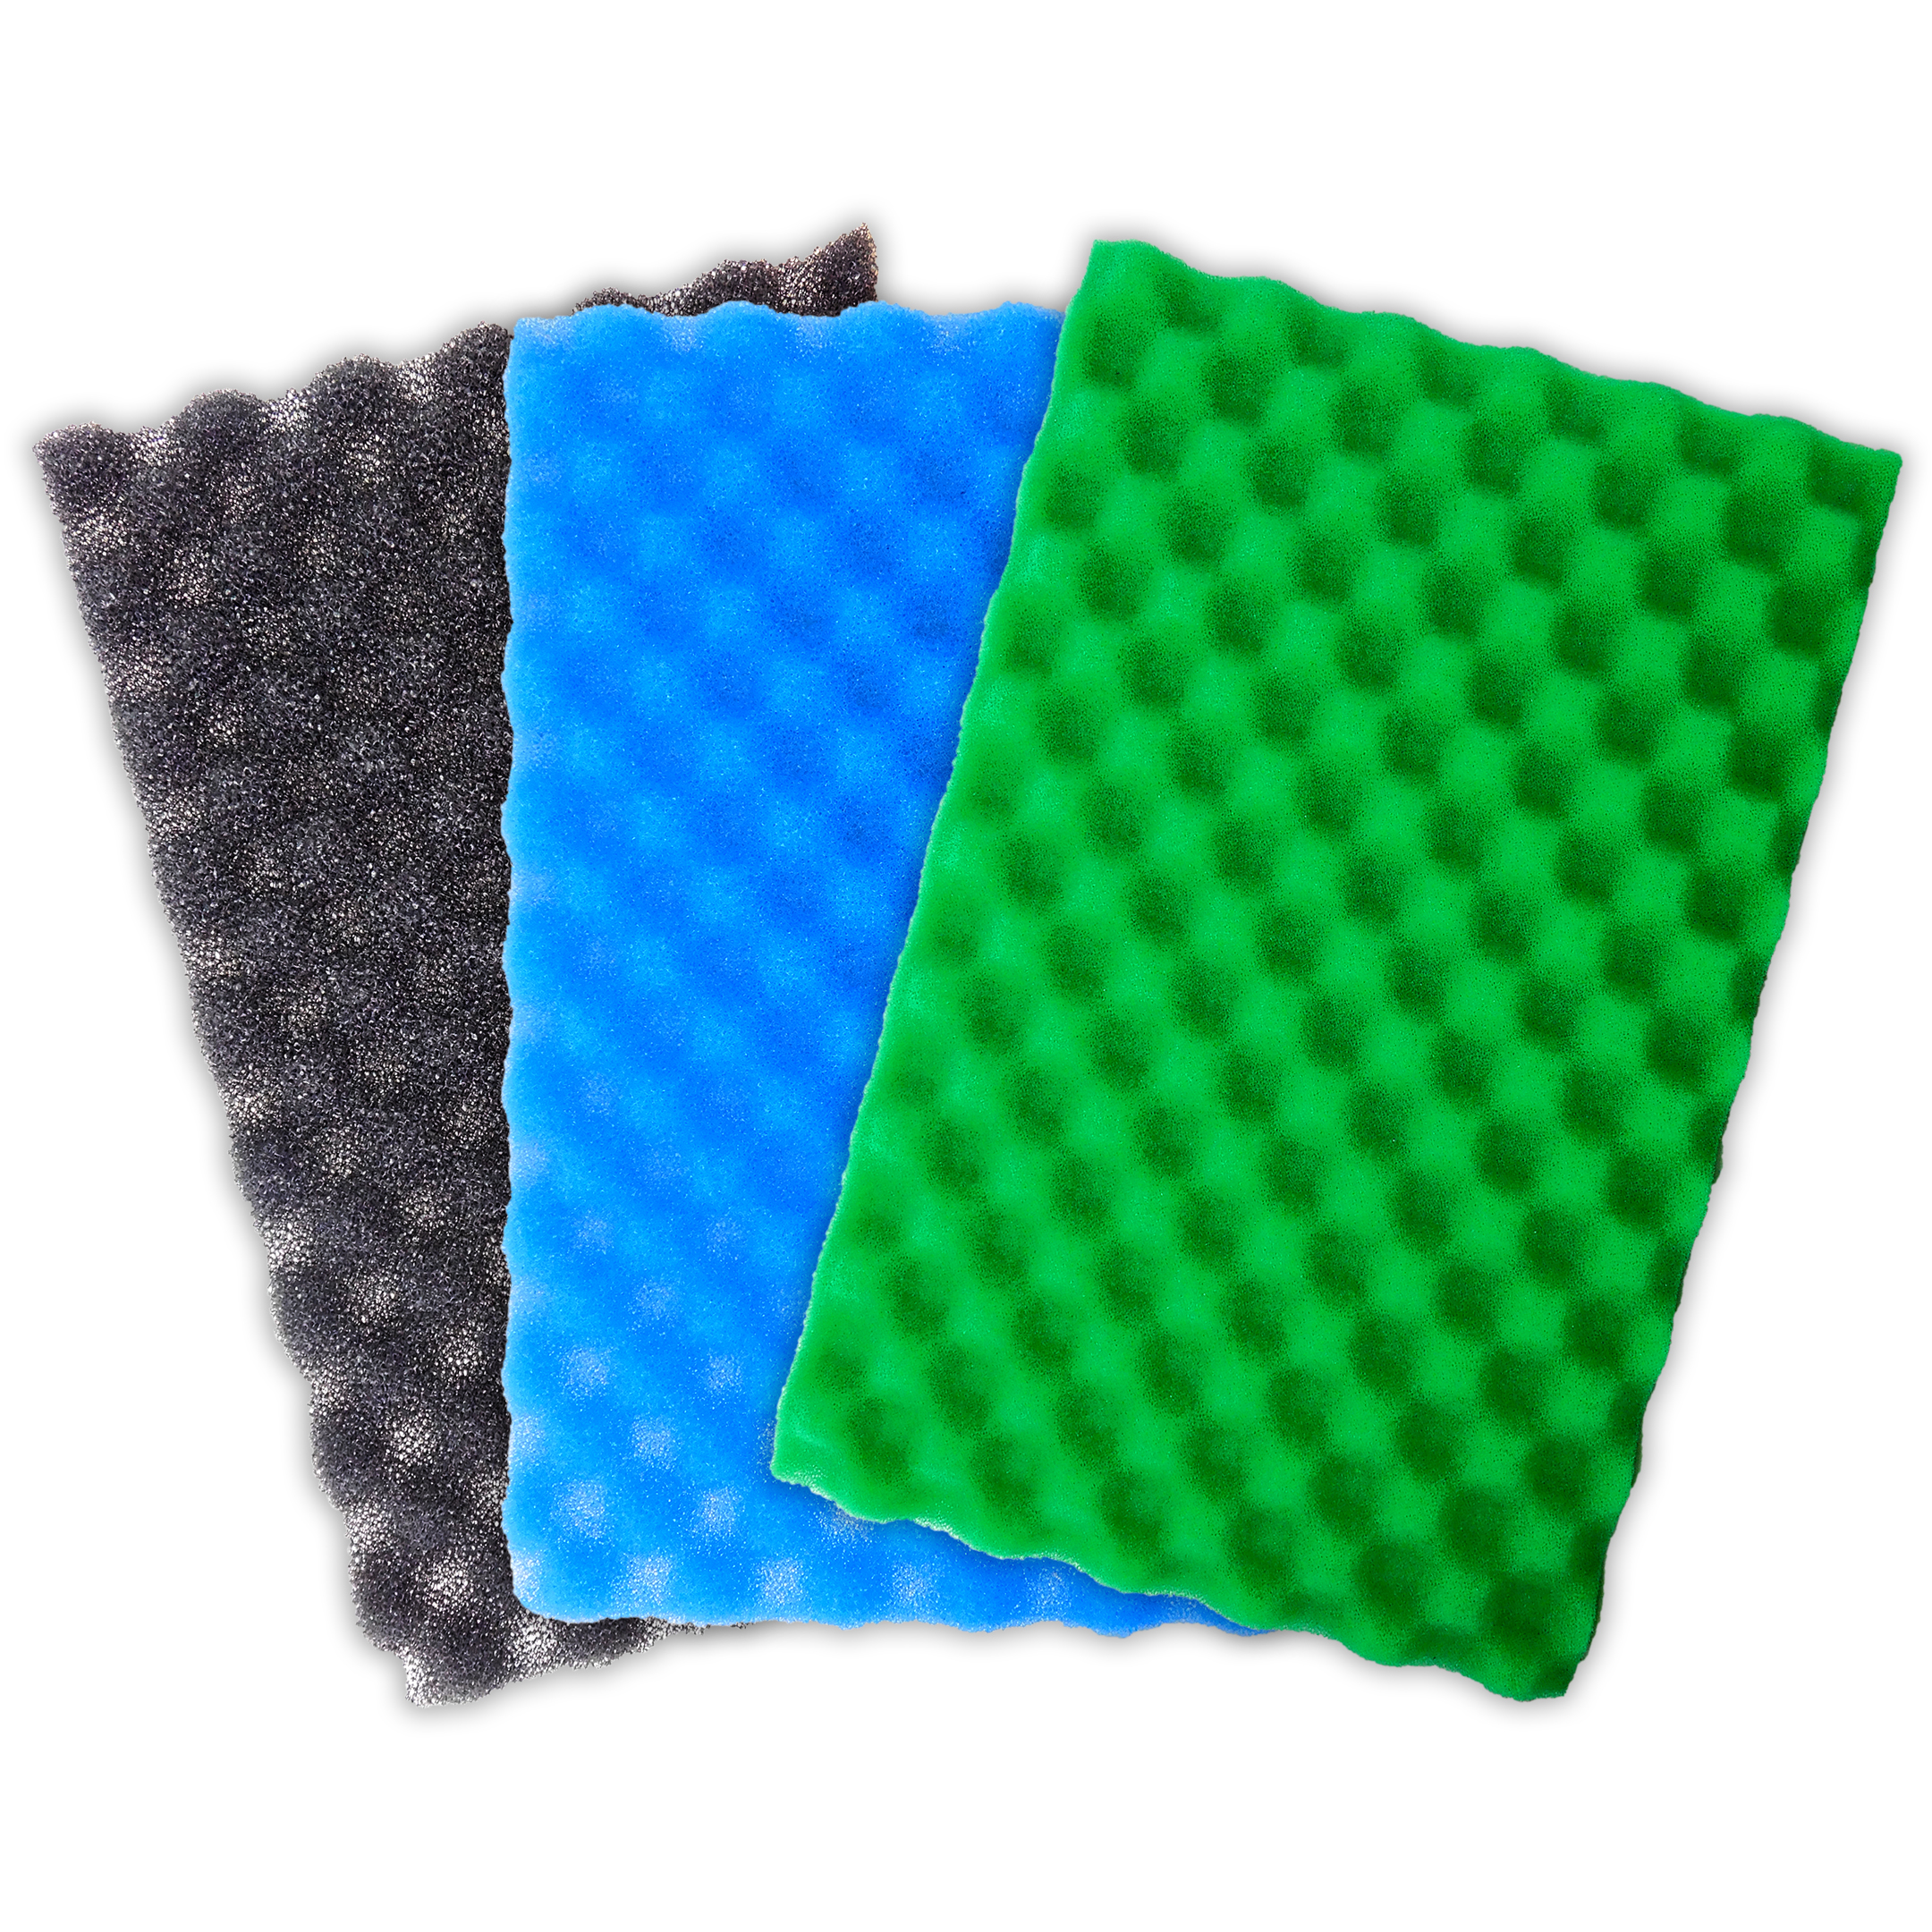 Fine Medium and Coarse Pack of 3 FISH POND SPARE REPLACEMENT FILTER FOAM SET 